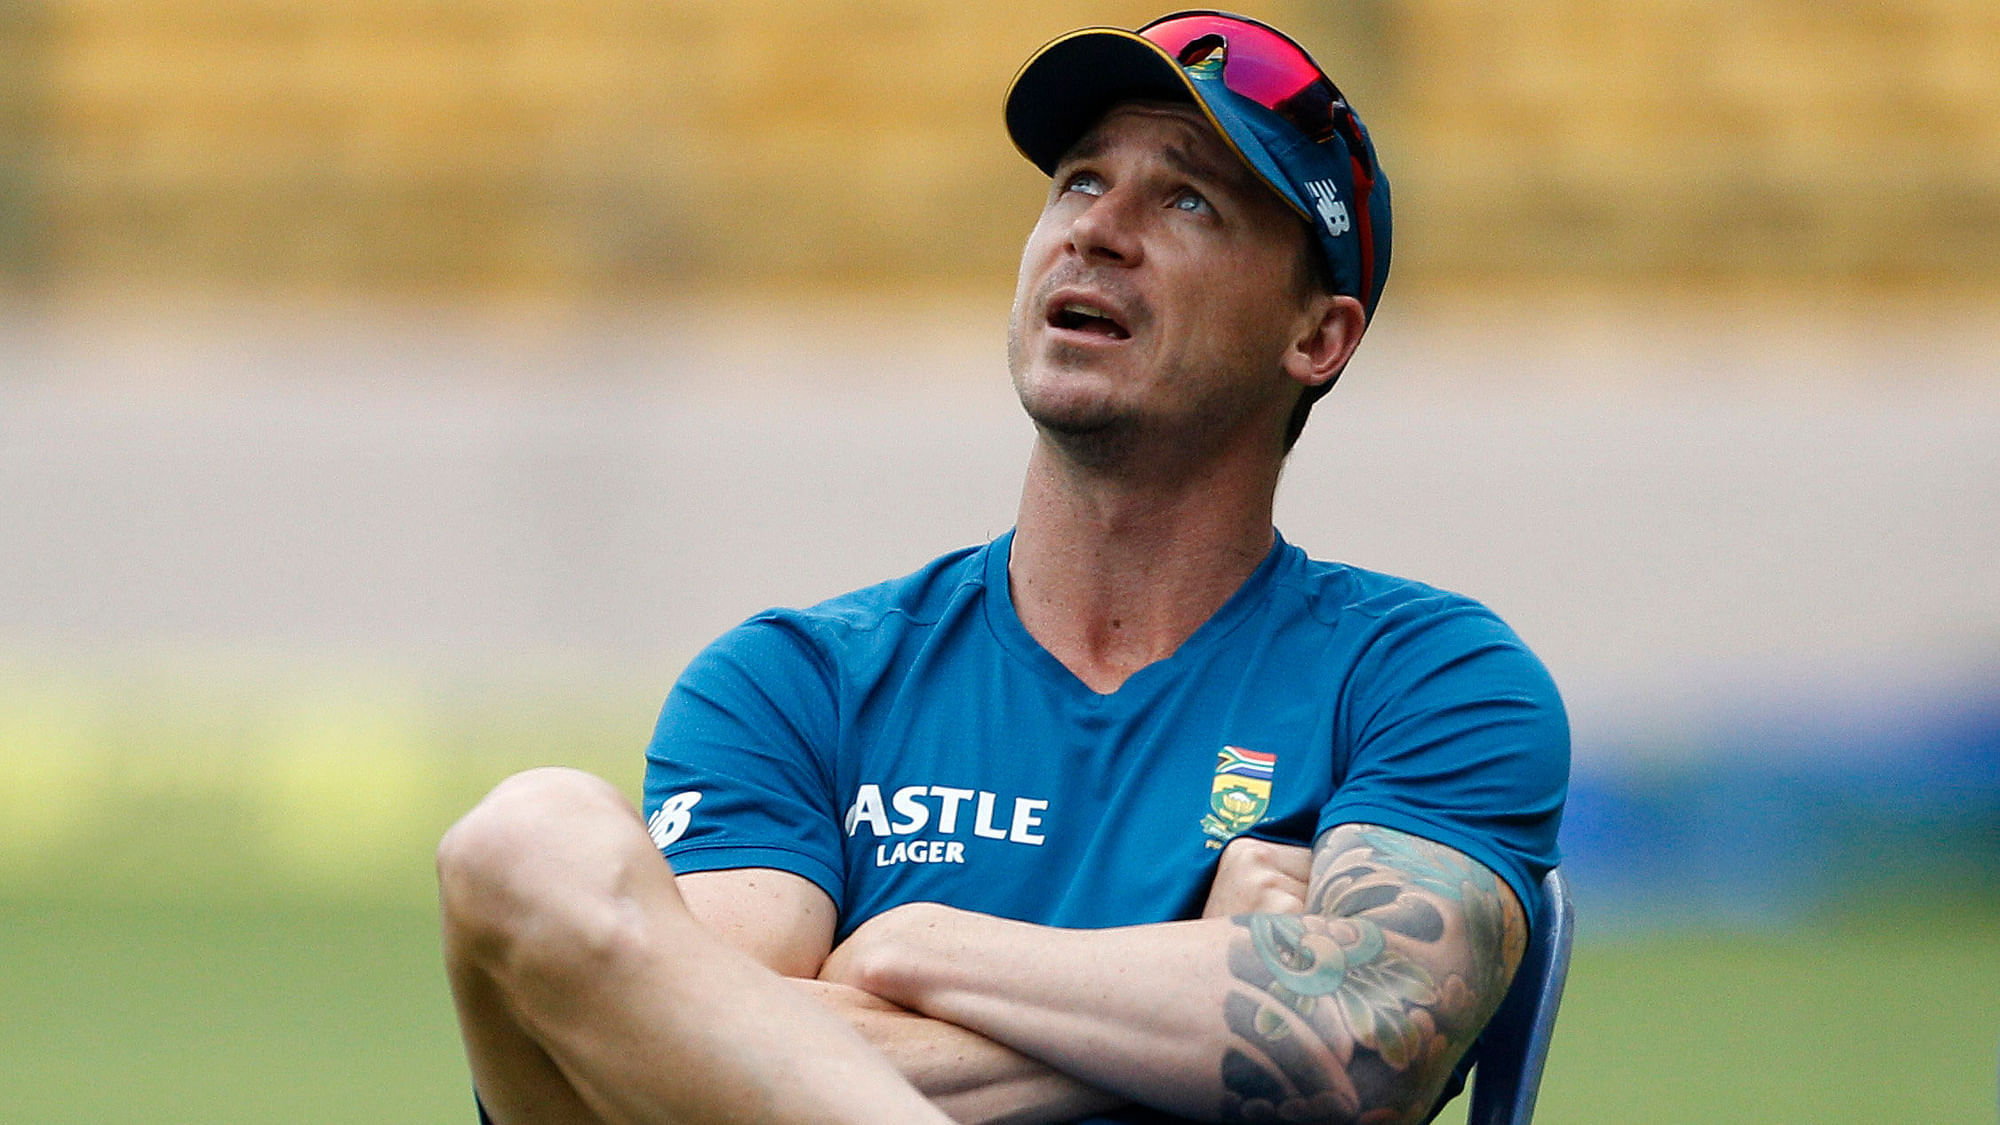 South Africa have added fast bowlers Duanne Oliver and Lungi Ngidi in place of veteran pacer Dale Steyn.